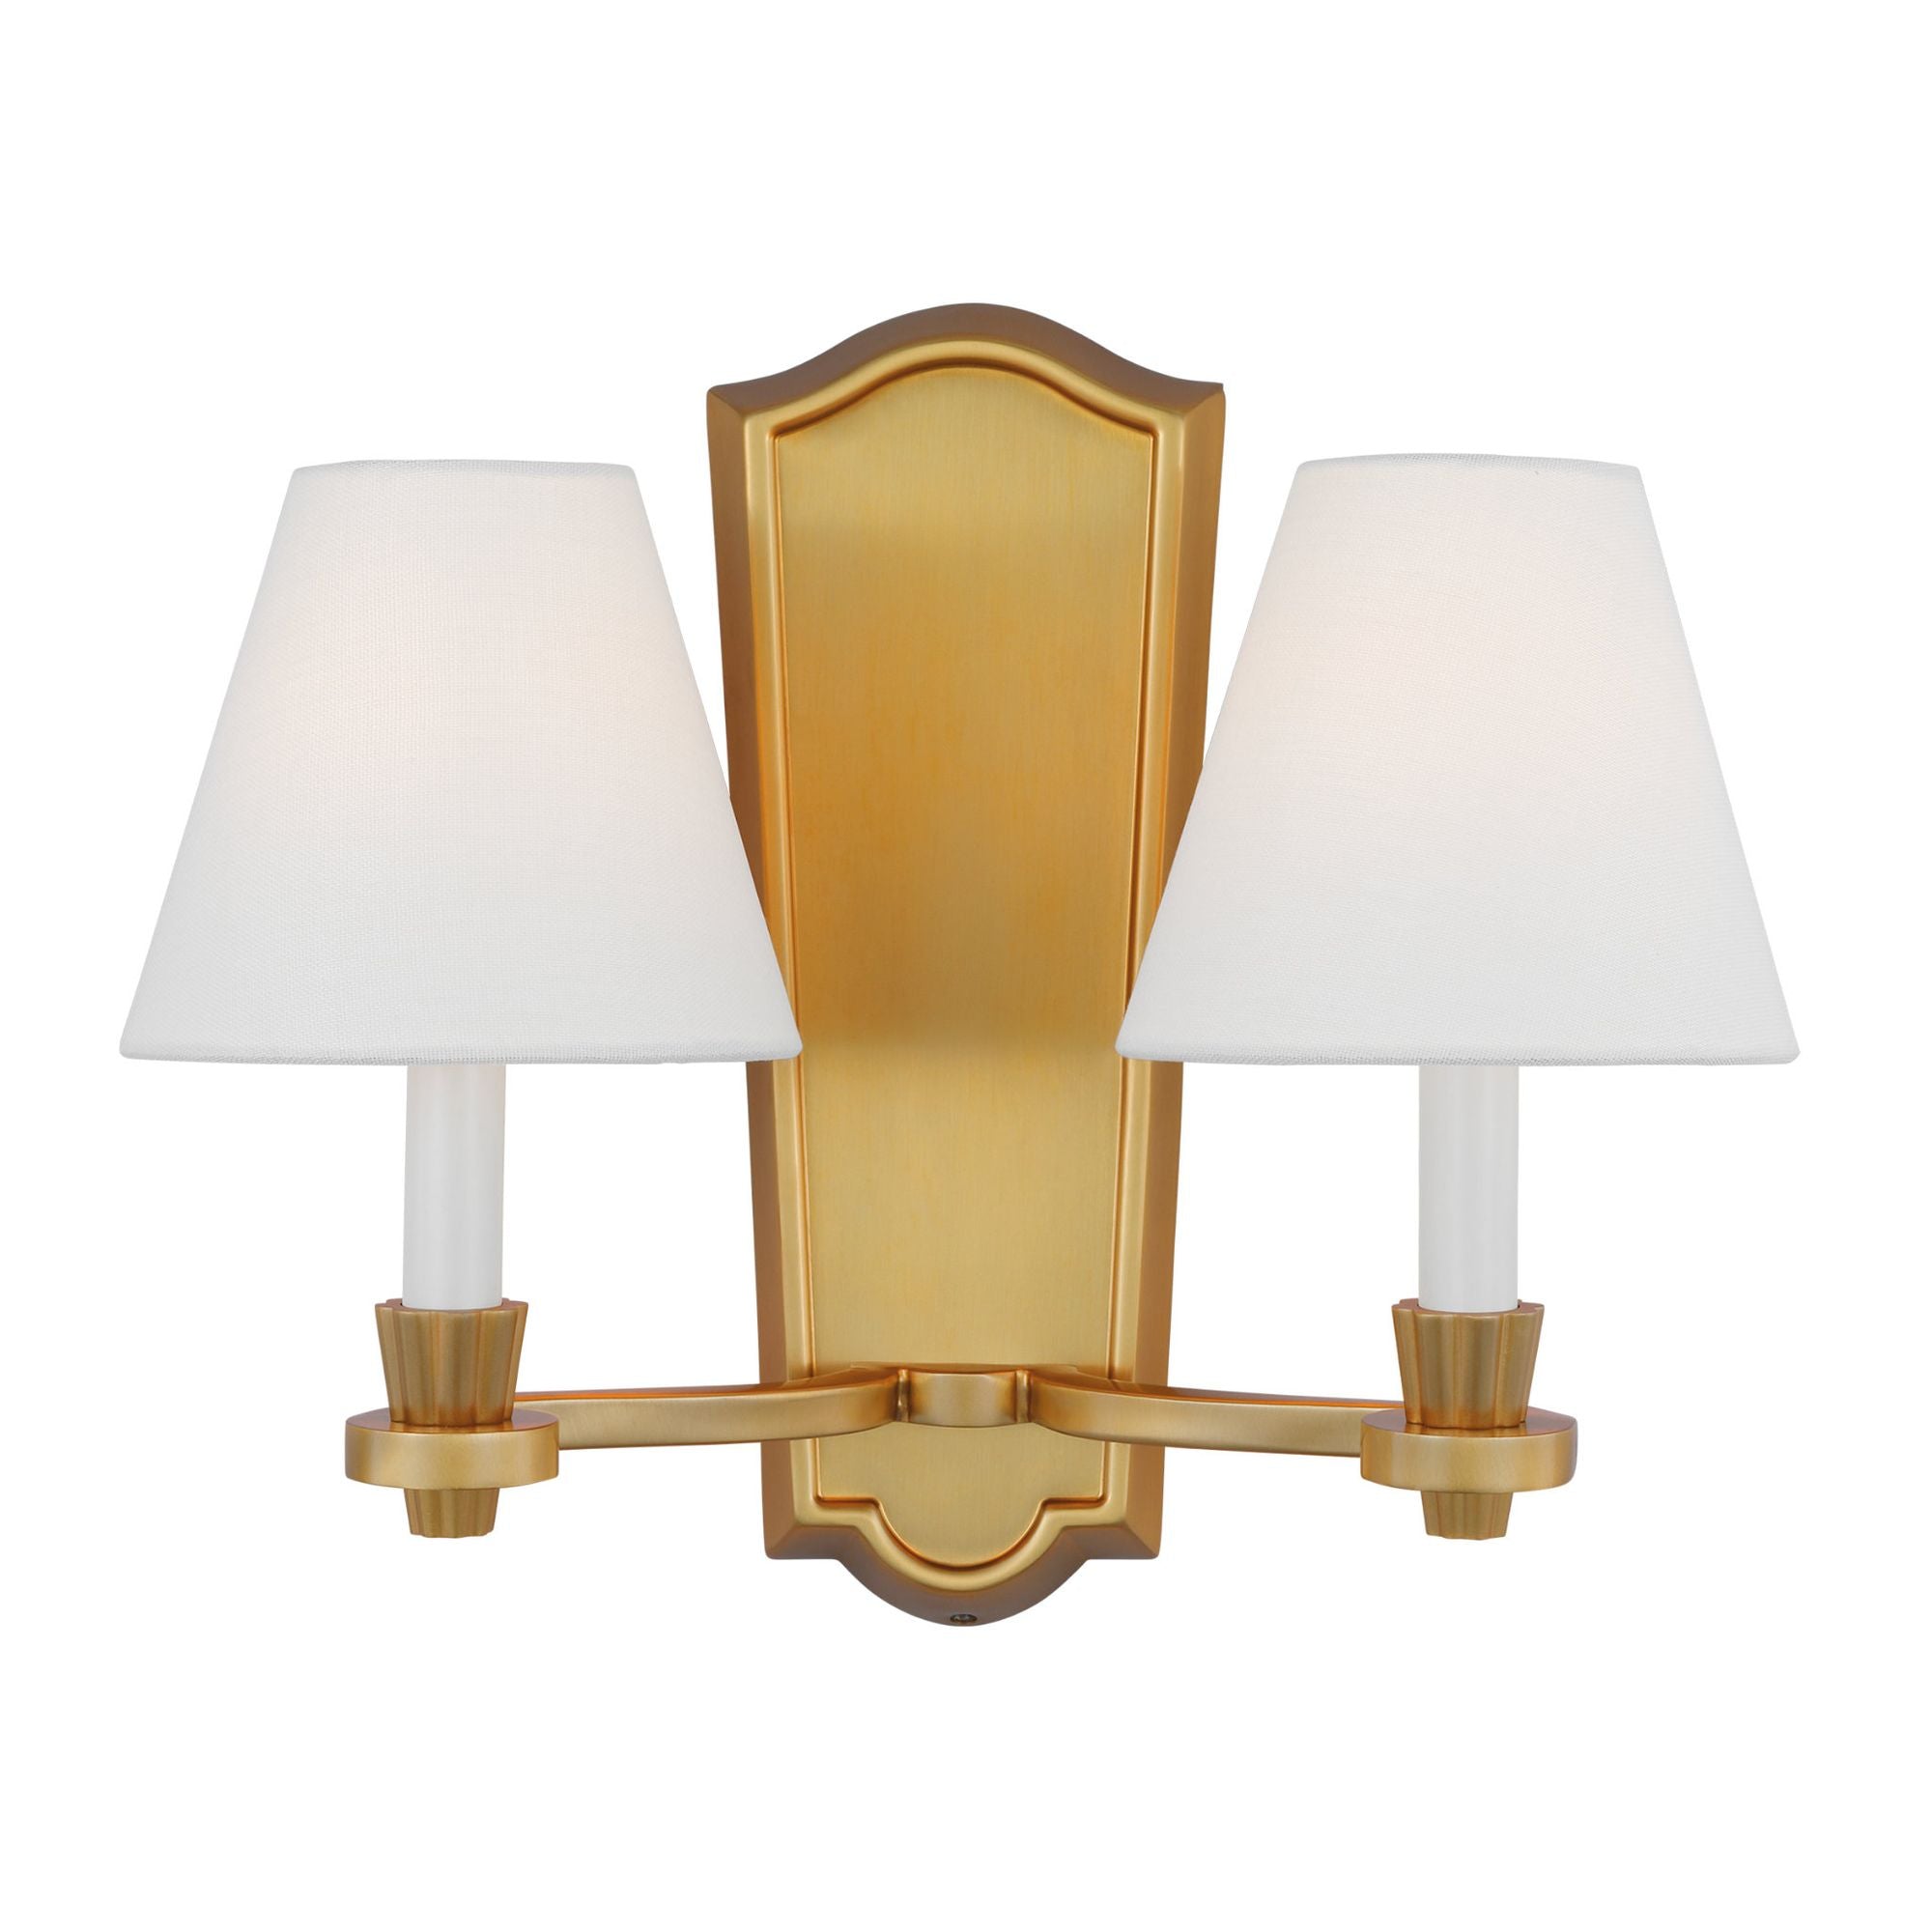 Alexa Hampton Paisley Double Sconce in Burnished Brass